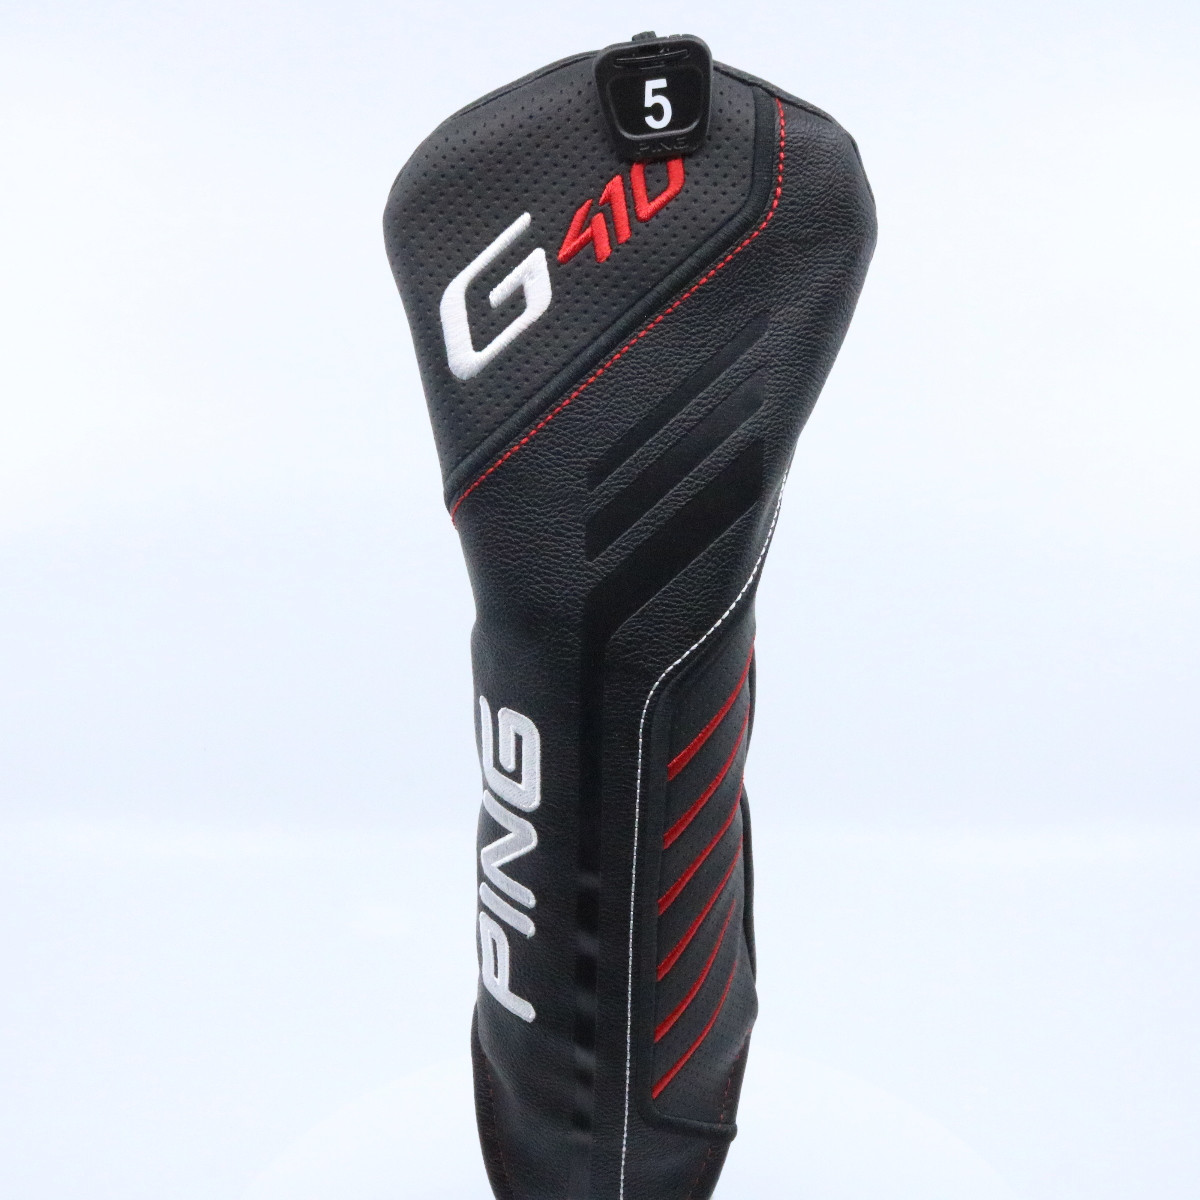 Hc 2071d Ping G410 5 Fairway Wood Headcover Cover Only Hc 2071d  76388.1602535420.1280.1280 ?c=2